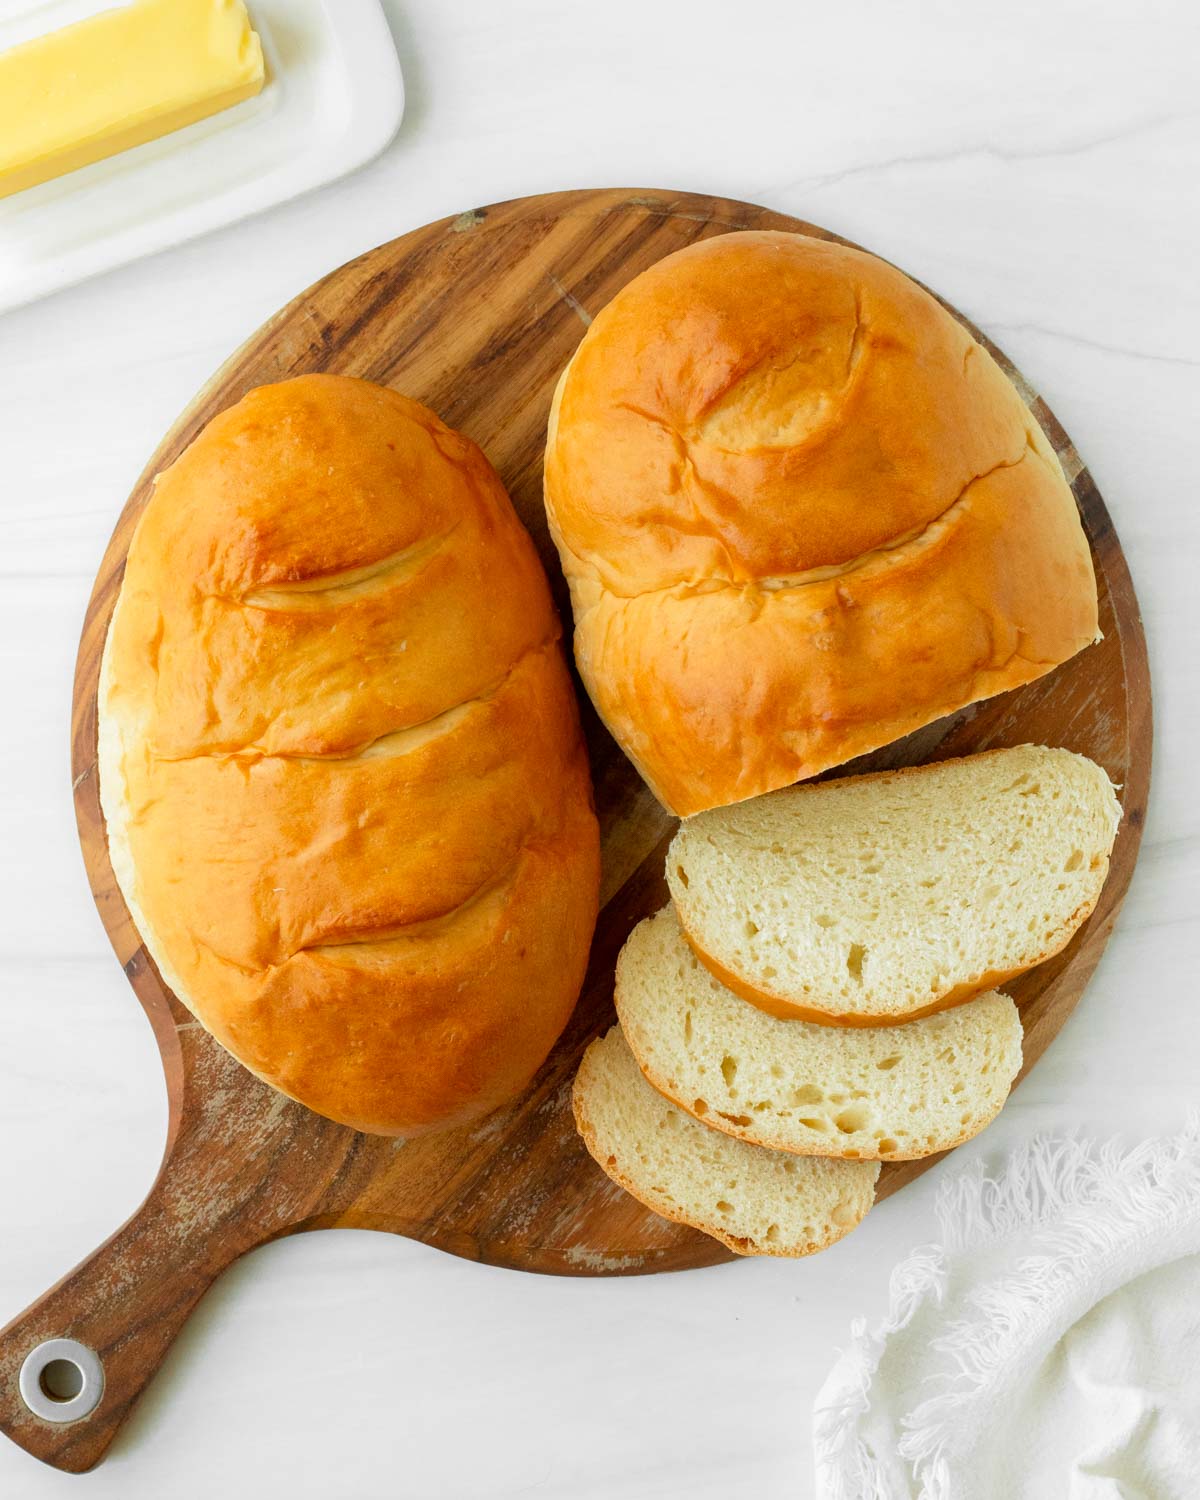 This homemade Italian bread recipe is an easy yeast bread recipe made with simple ingredients for a flavorful, soft bread perfect for using in French toast, sandwiches like grilled cheese, and making into garlic bread.